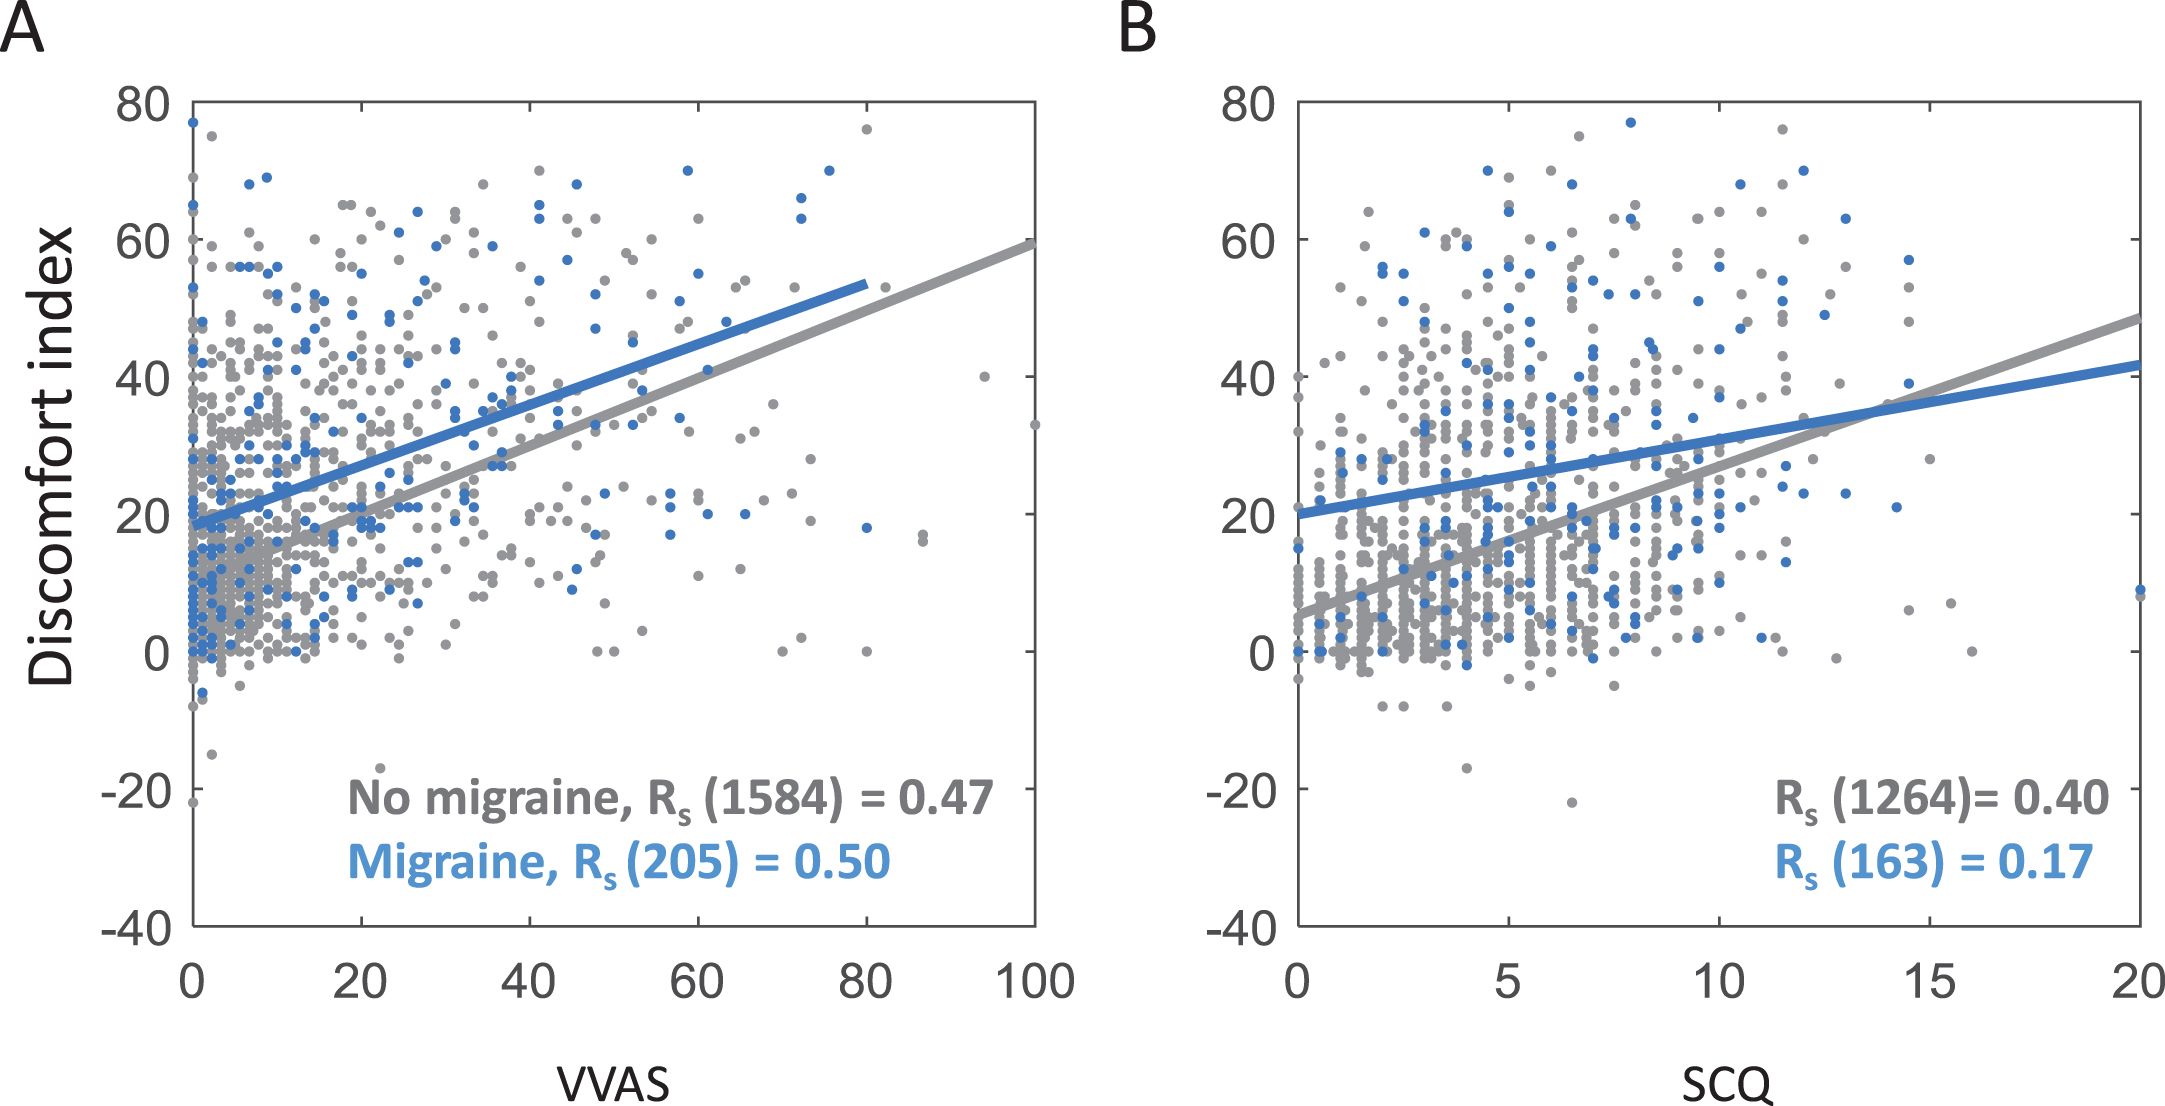 Scatterplots showing Spearman correlations between the two measures of PPPD A = Visual Vertigo Analogue Scale (VVAS), B = Situational Characteristics Questionairre (SCQ) and visual discomfort index (high discomfort image rating –low discomfort image rating) for both participants with migraine (blue) and those without (grey), controlling for age and gender.